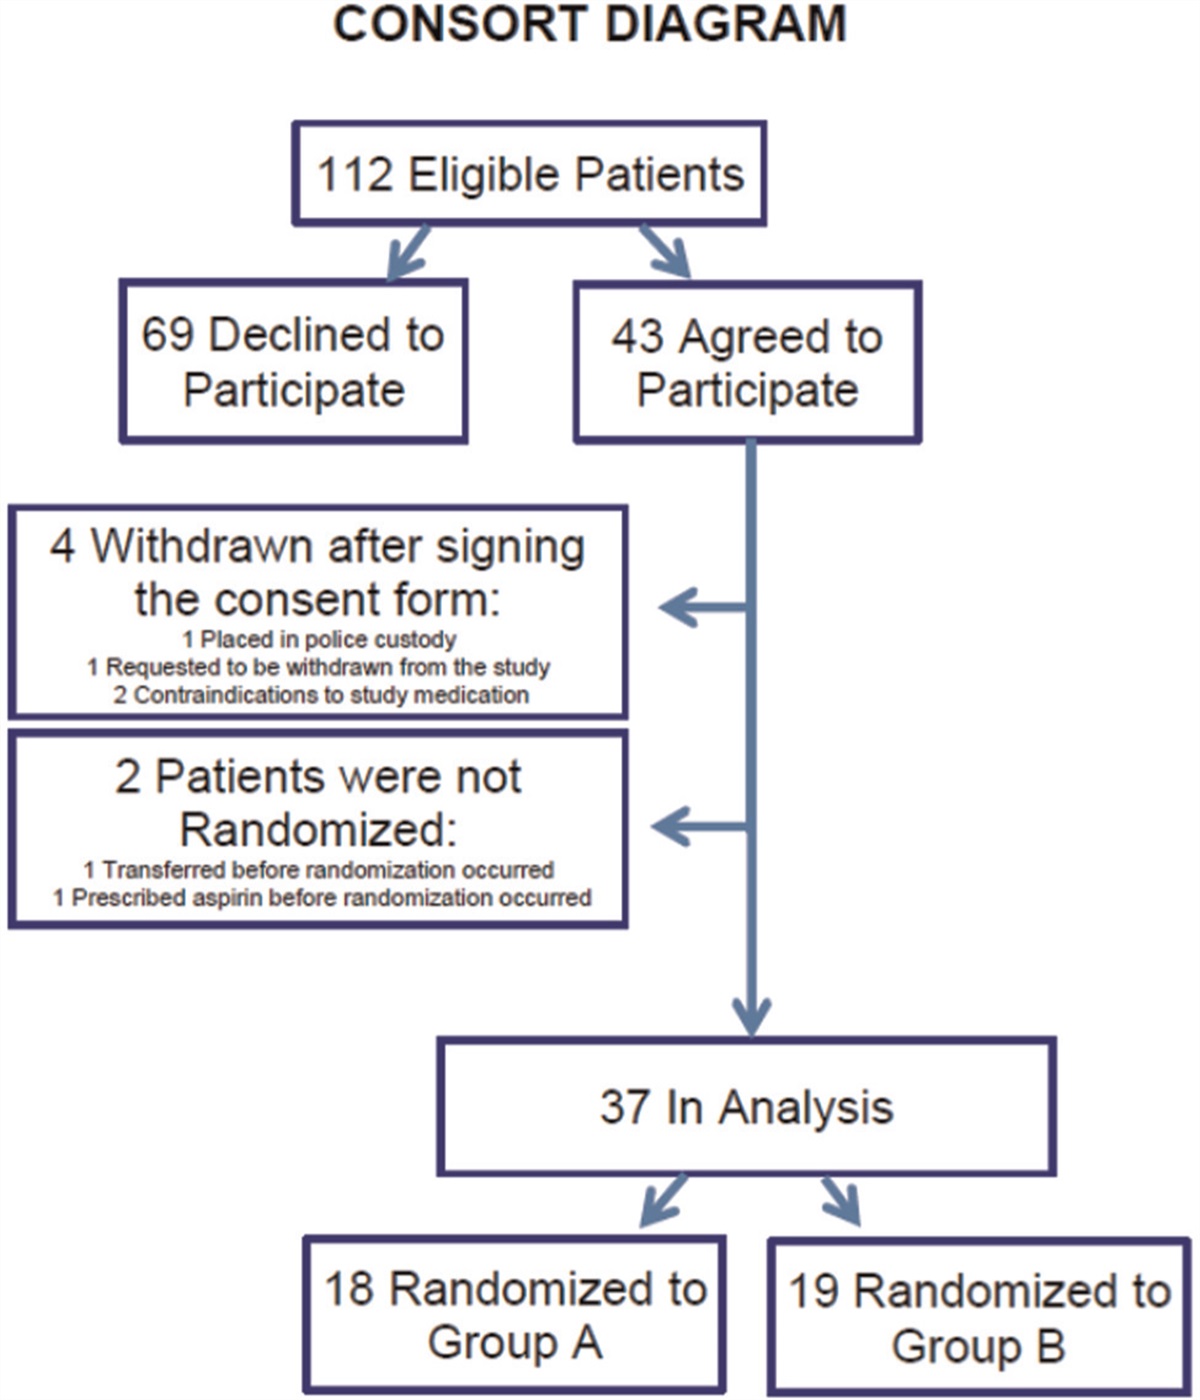 Combination of aspirin and rosuvastatin for reduction of venous thromboembolism in severely injured patients: a double-blind, placebo-controlled, pragmatic randomized phase II clinical trial (The STAT Trial)